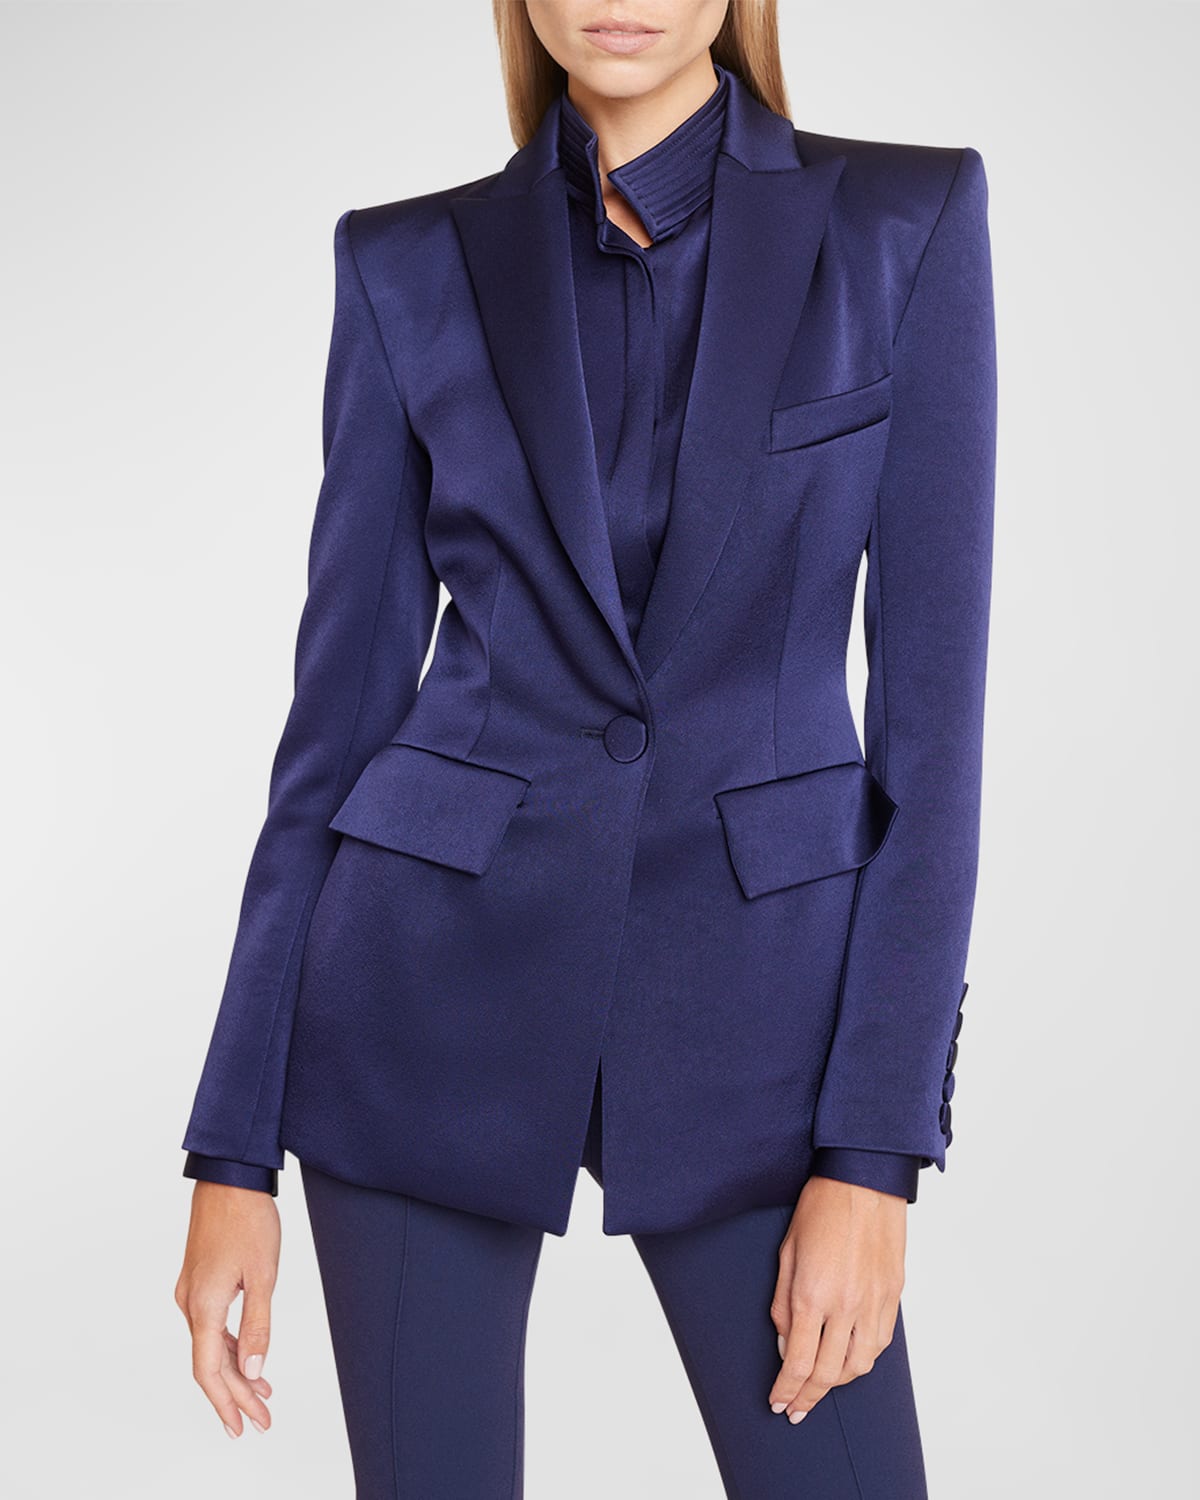 ALEX PERRY MANON SATIN CREPE FITTED BLAZER